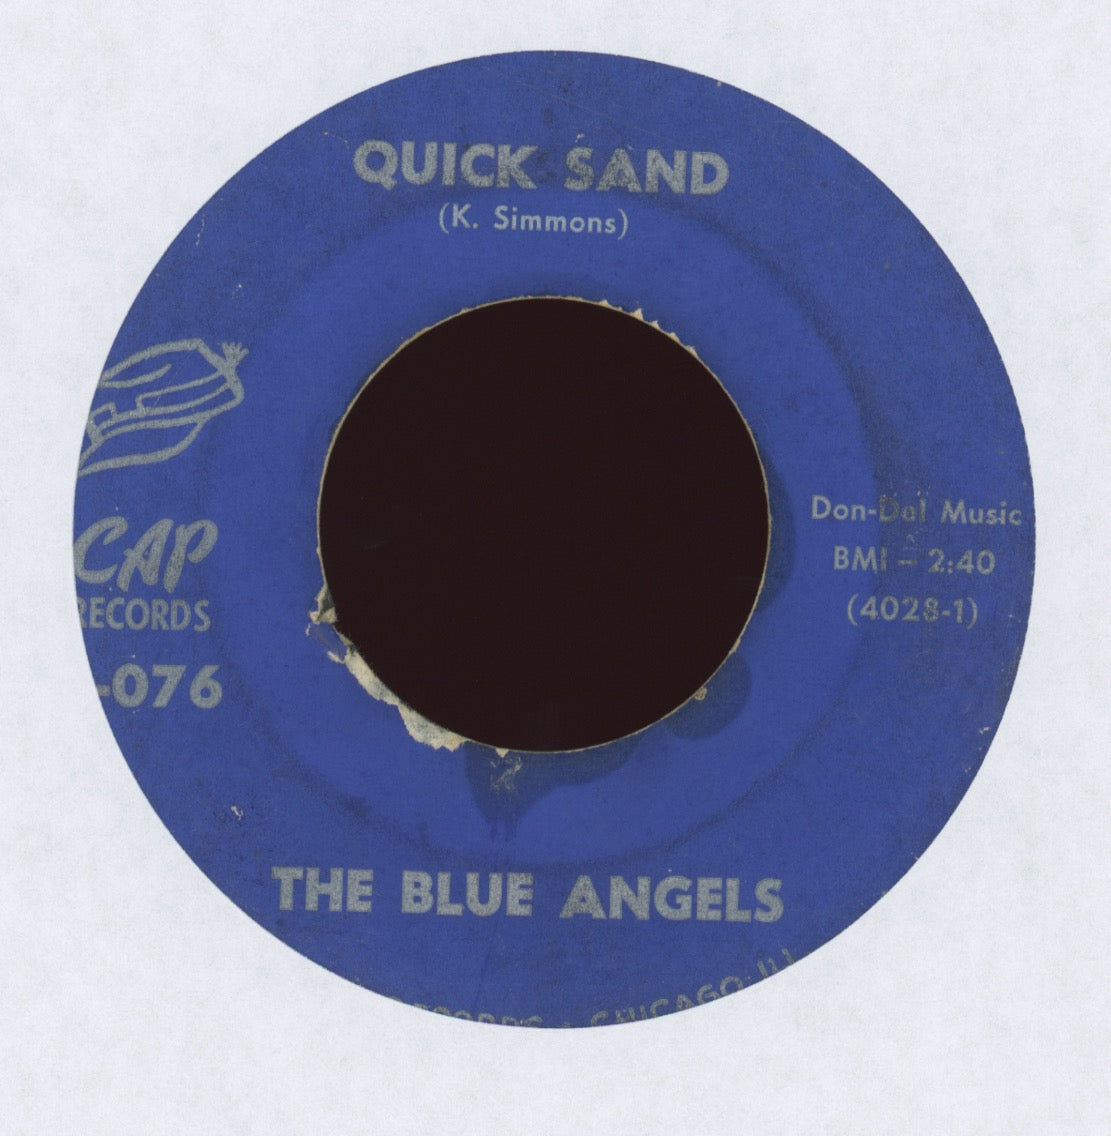 The Blue Angels - Quick Sand on Cap